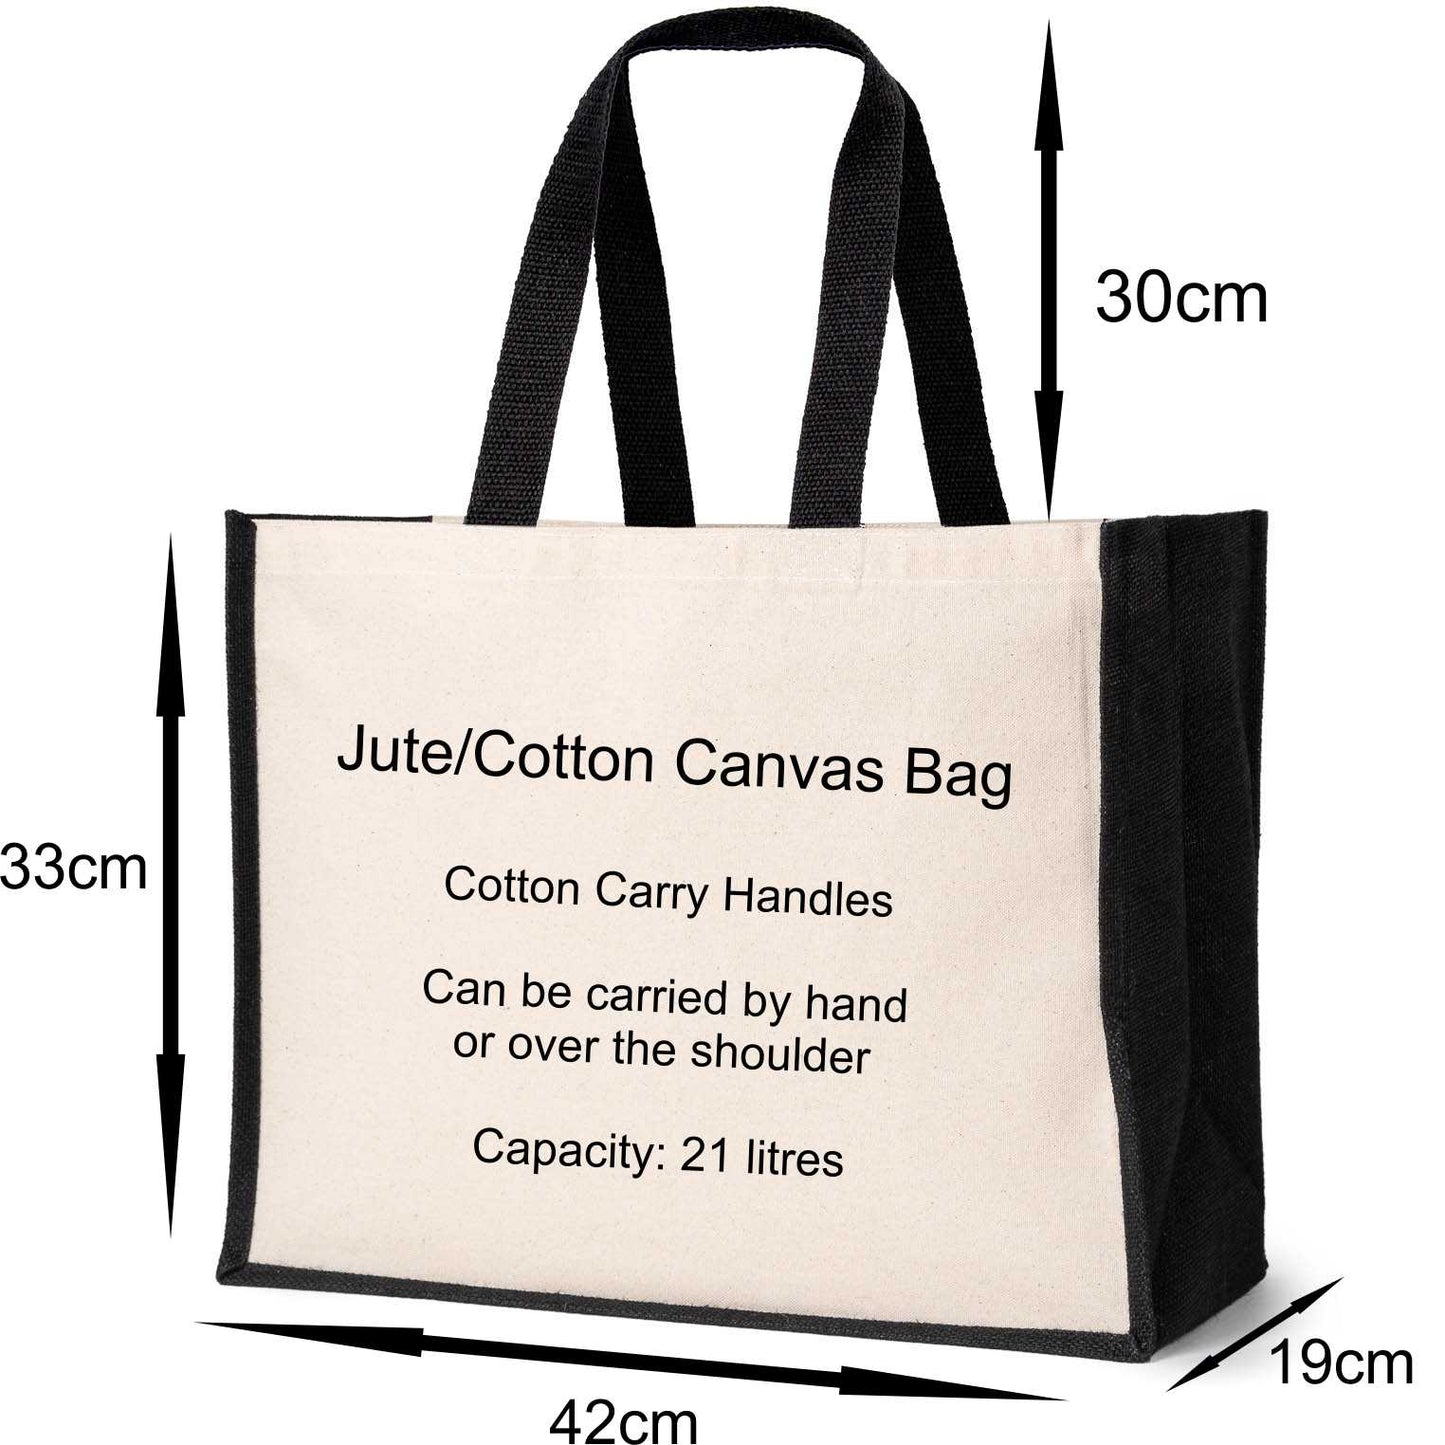 Who New 40 Could Look This Good Tote Bag 40th Birthday Ladies Canvas Shopper